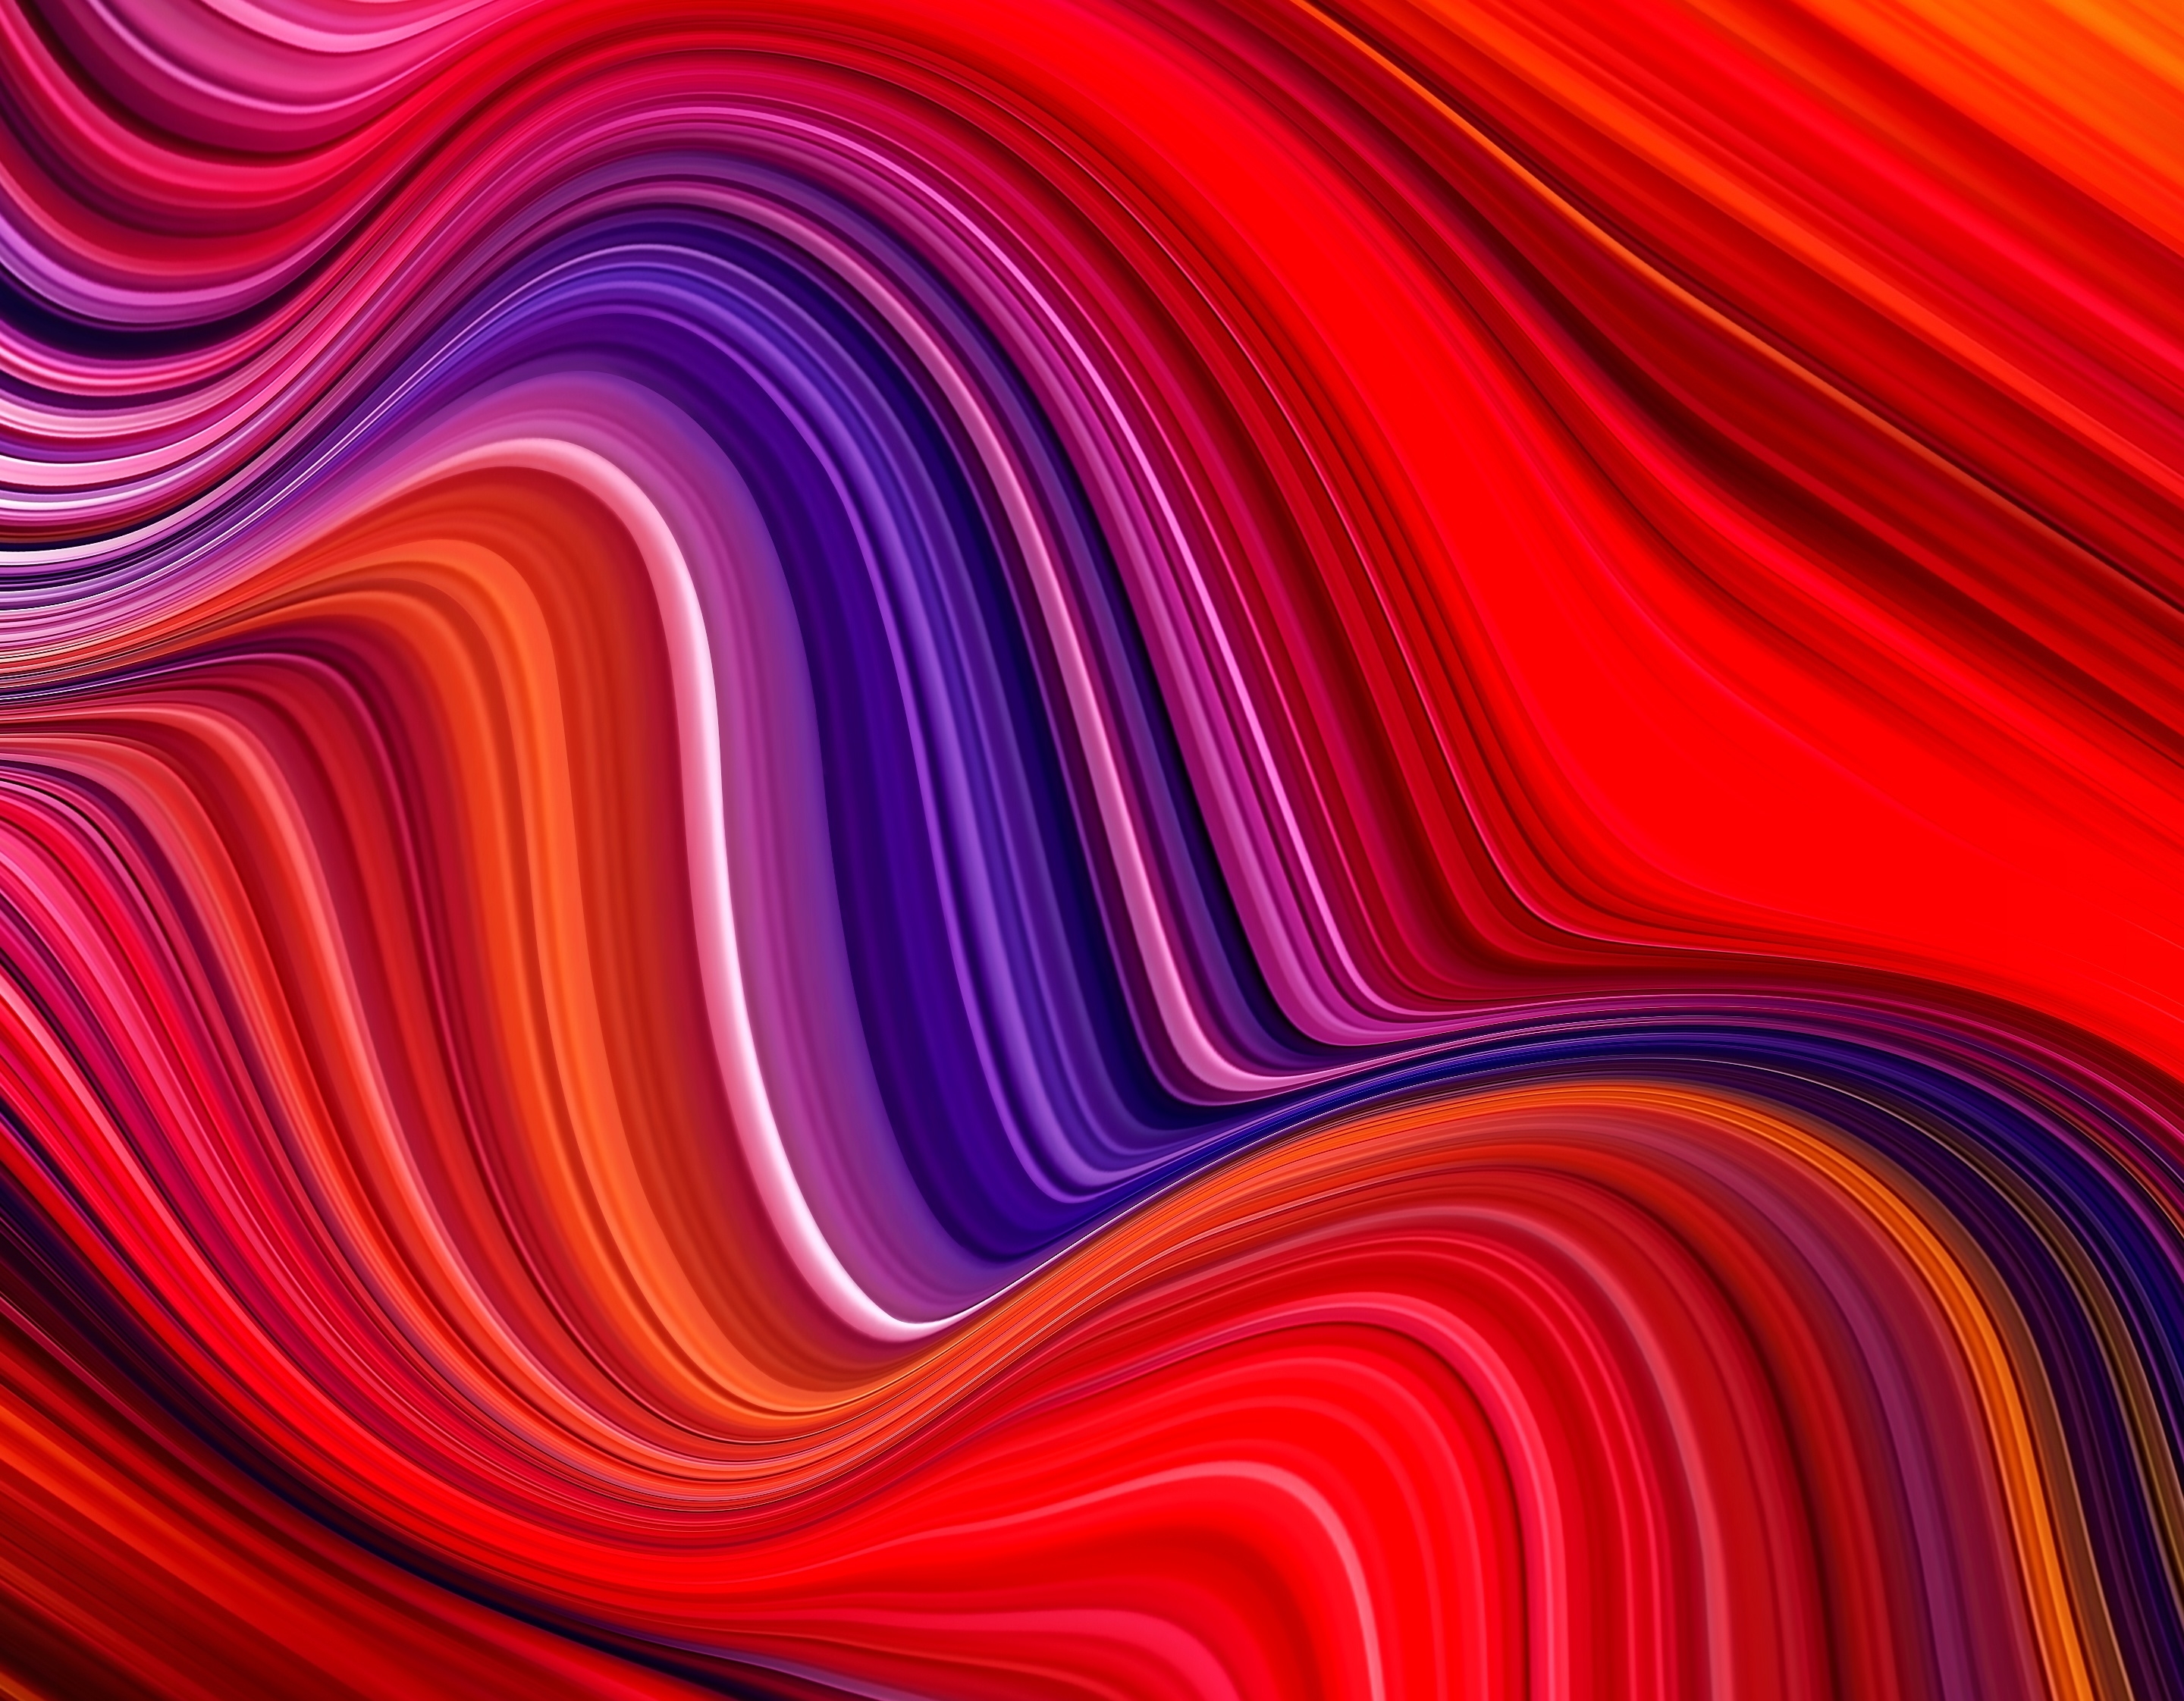 Curved Abstract Design Wallpaper, HD Abstract 4K Wallpapers, Images and